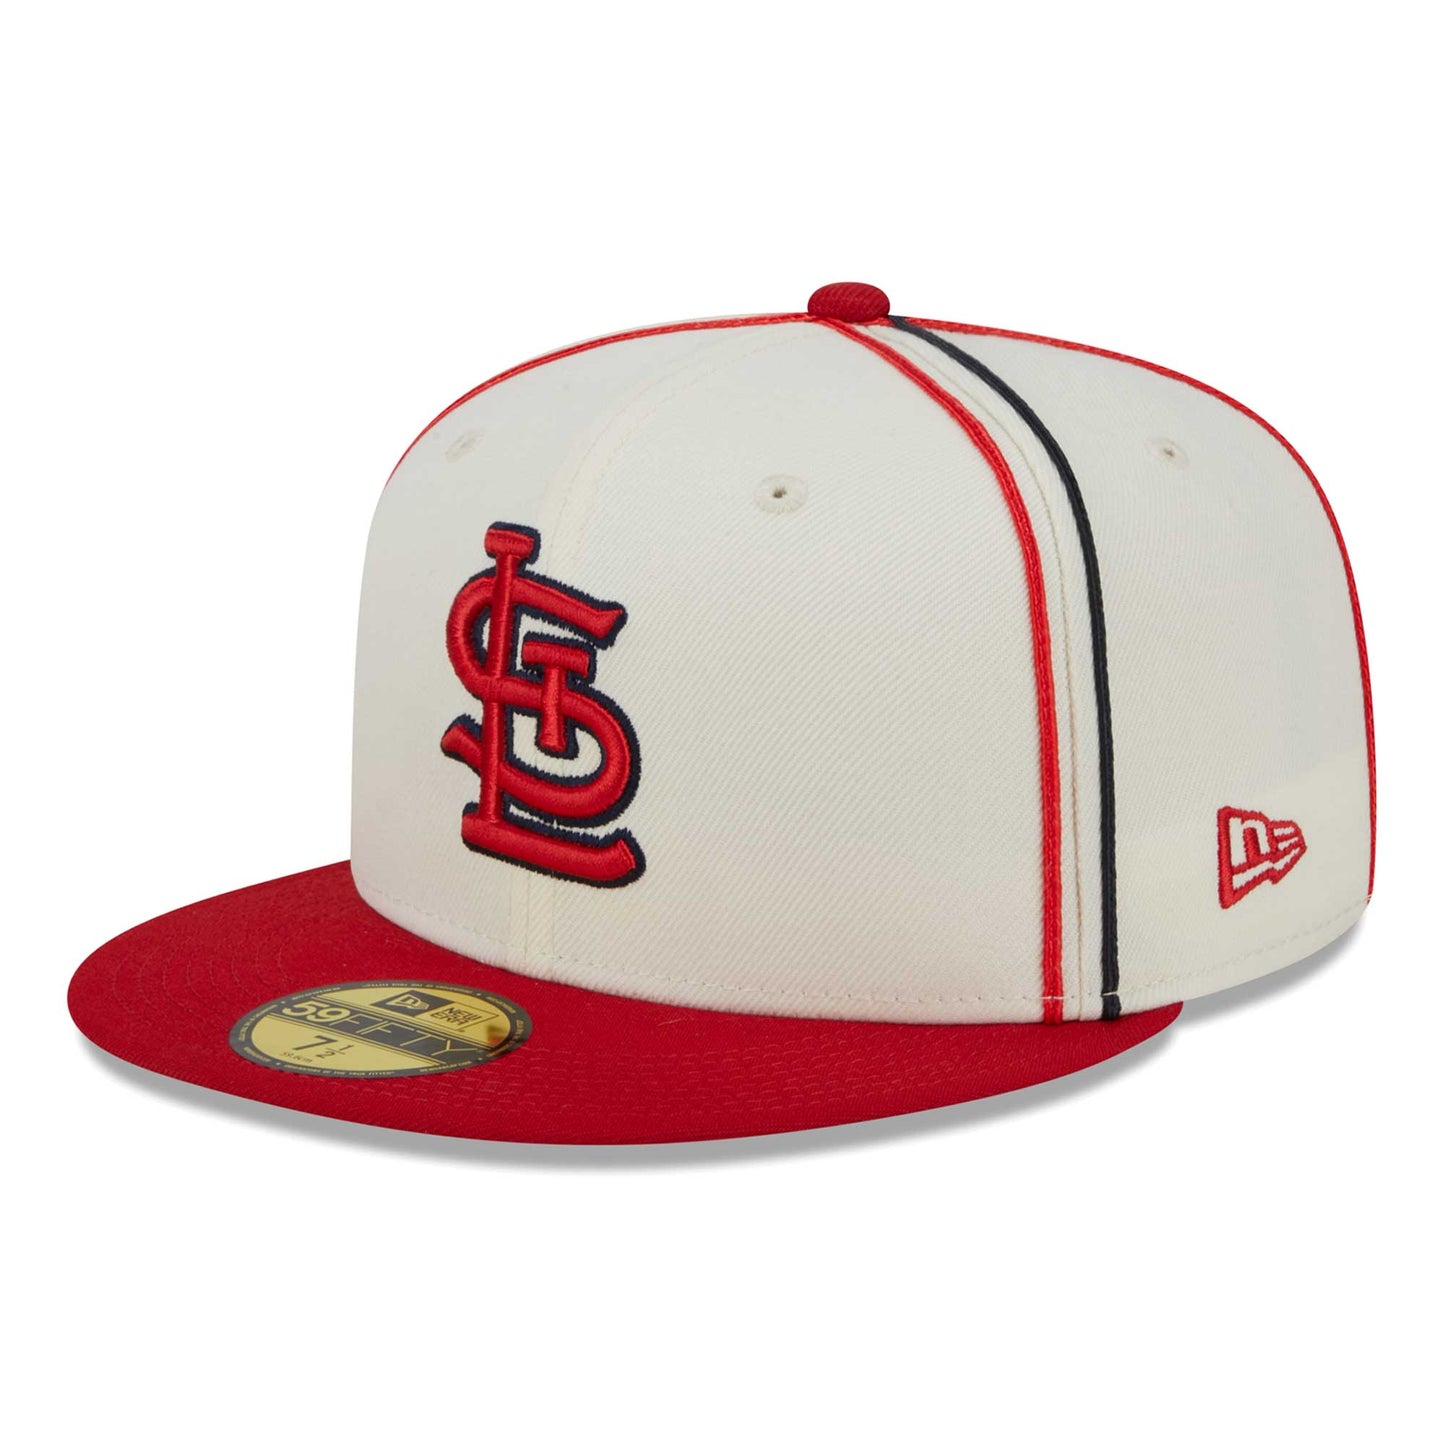 St. Louis Cardinals New Era Chrome Sutash 59FIFTY Fitted Hat - Cream/Red